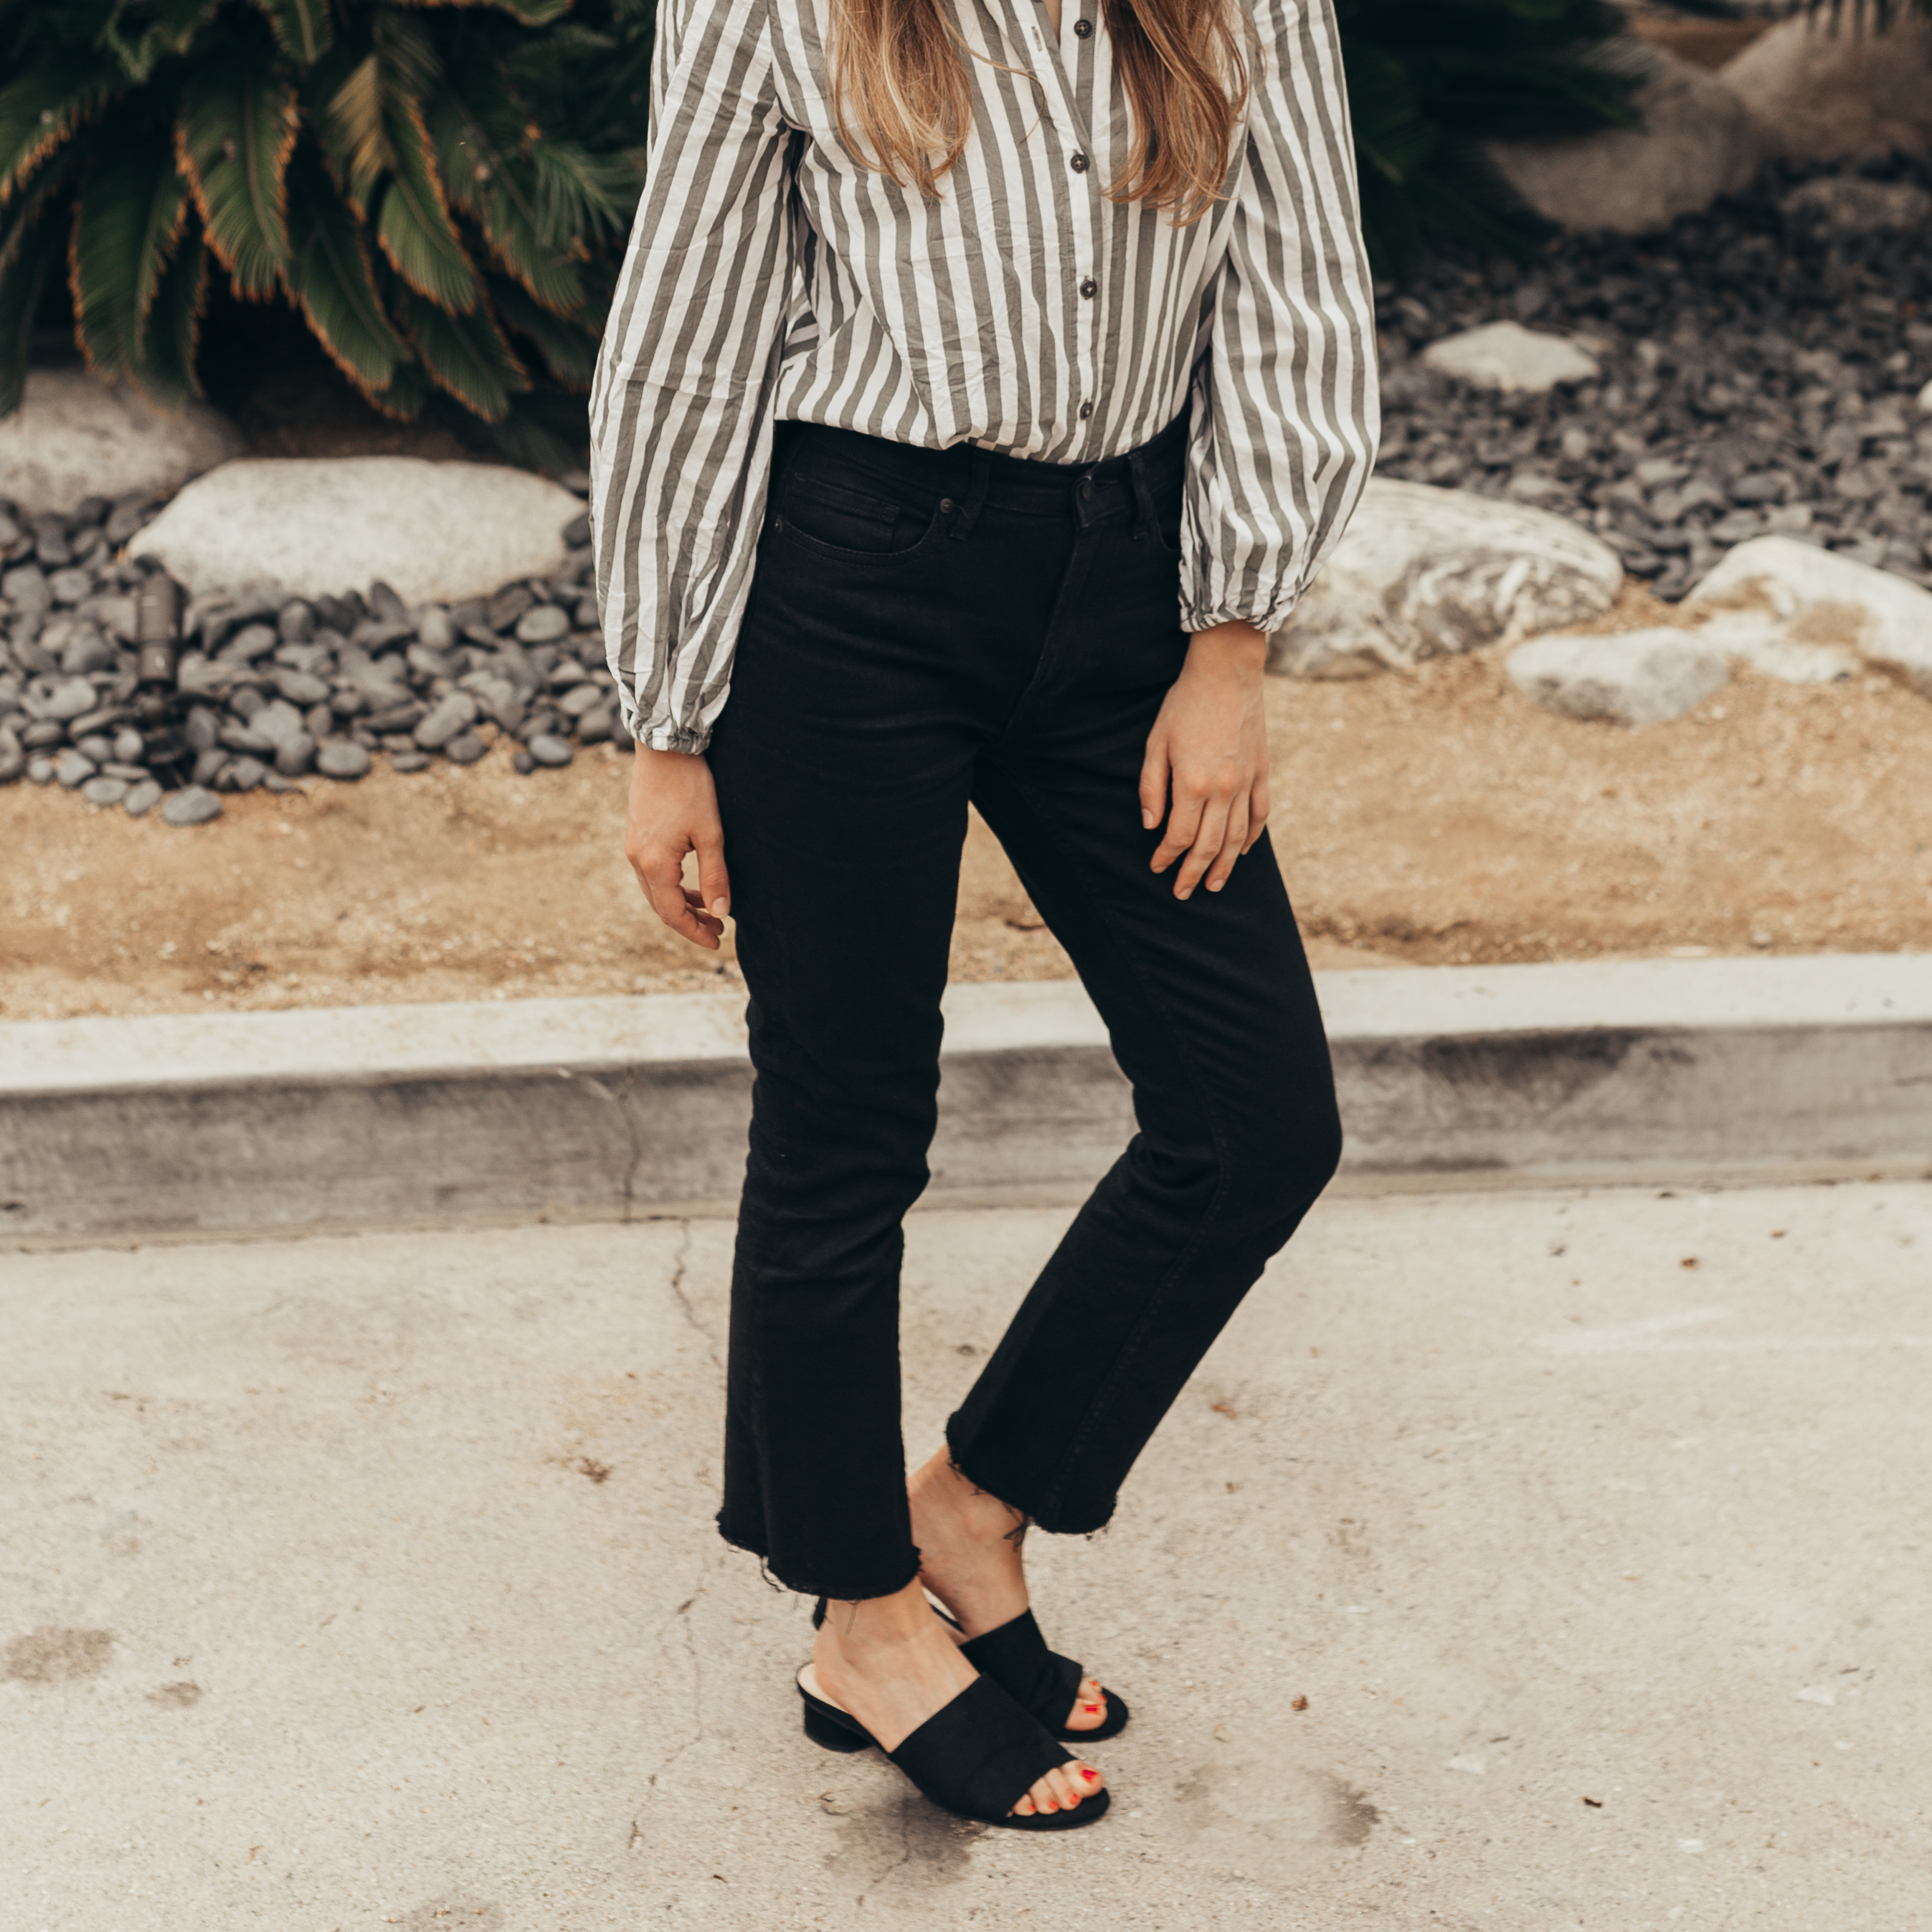 Stylish & Casual Summer Work Outfit Idea | Twinspiration